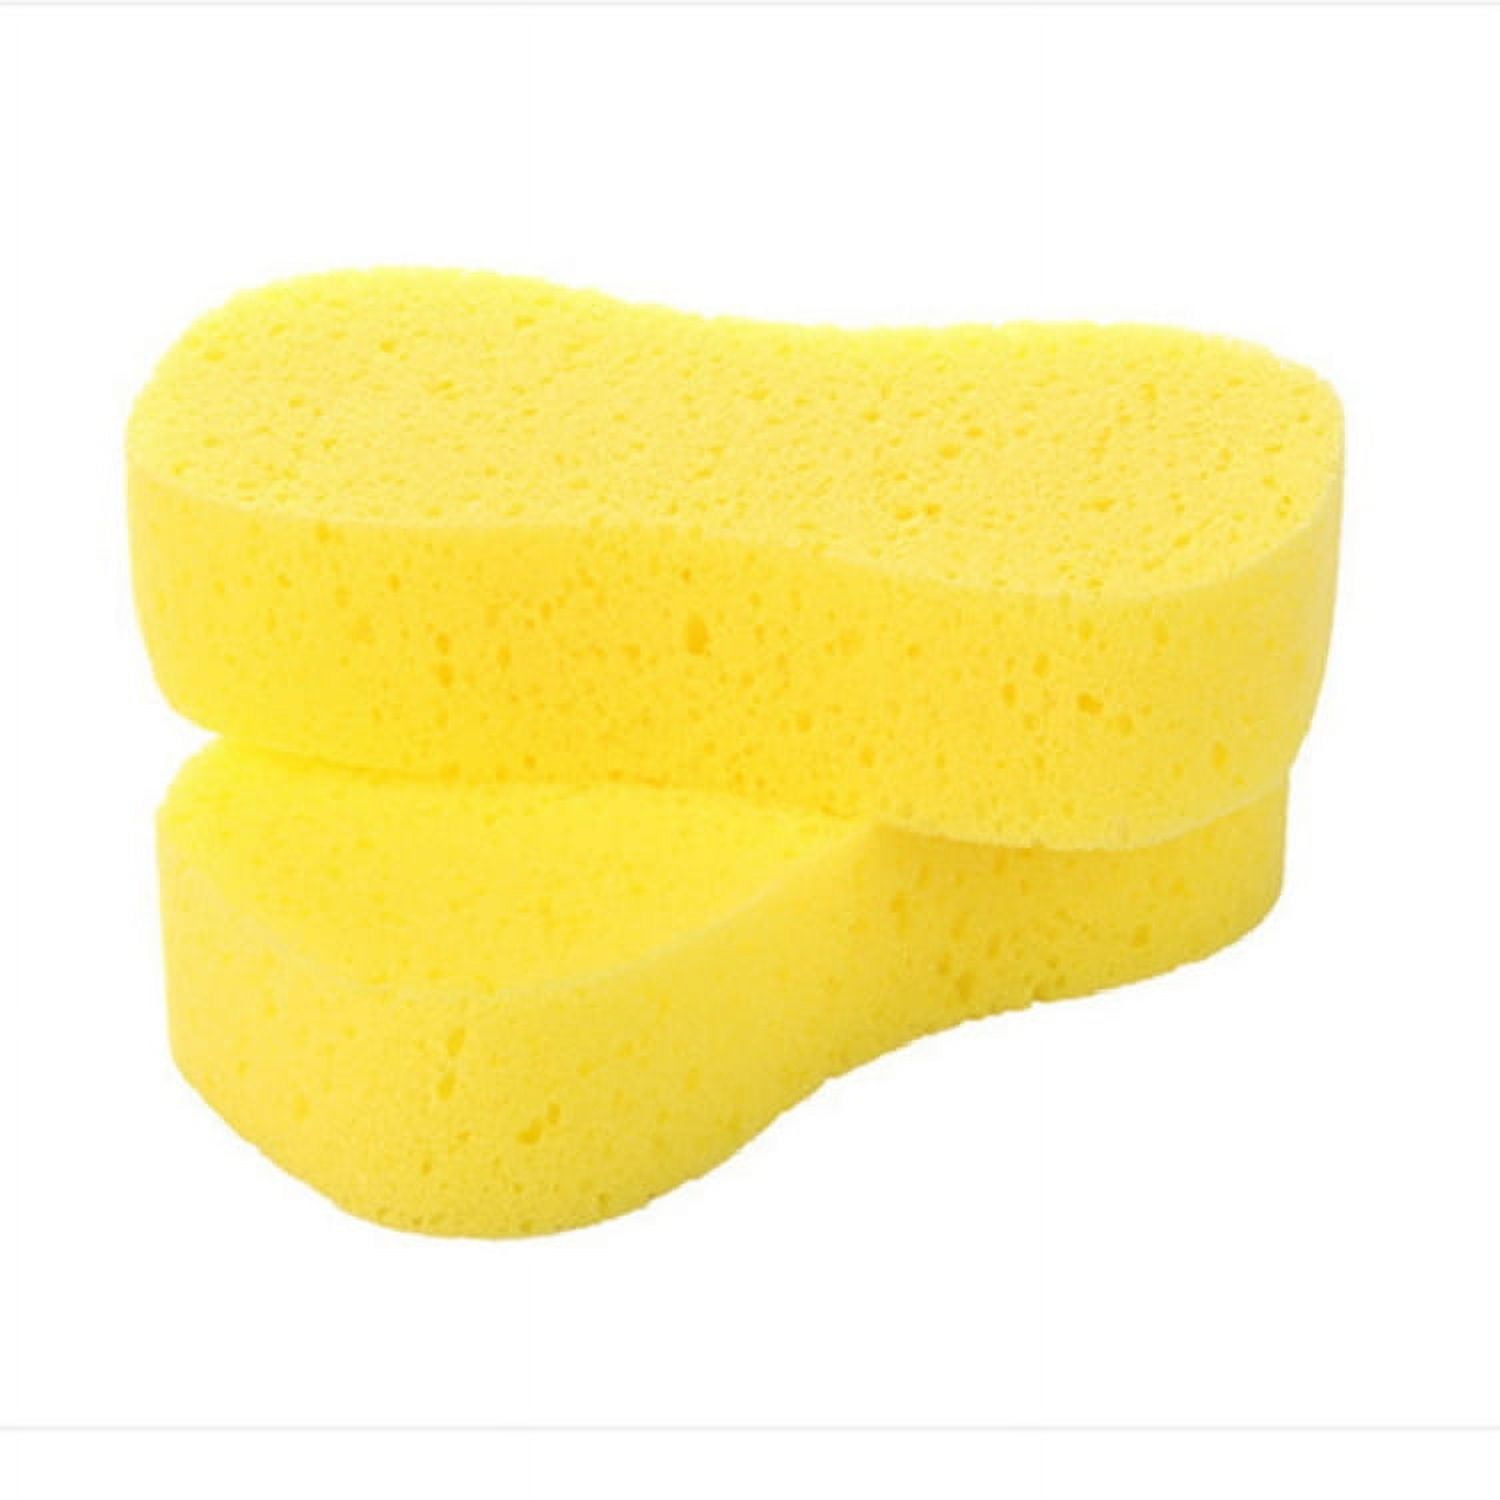 Greenet Cellulose Large Sponges for Cleaning, Multi-Use Scrub, for Car, Boat and Kitchen, Pack of 3, Yellow